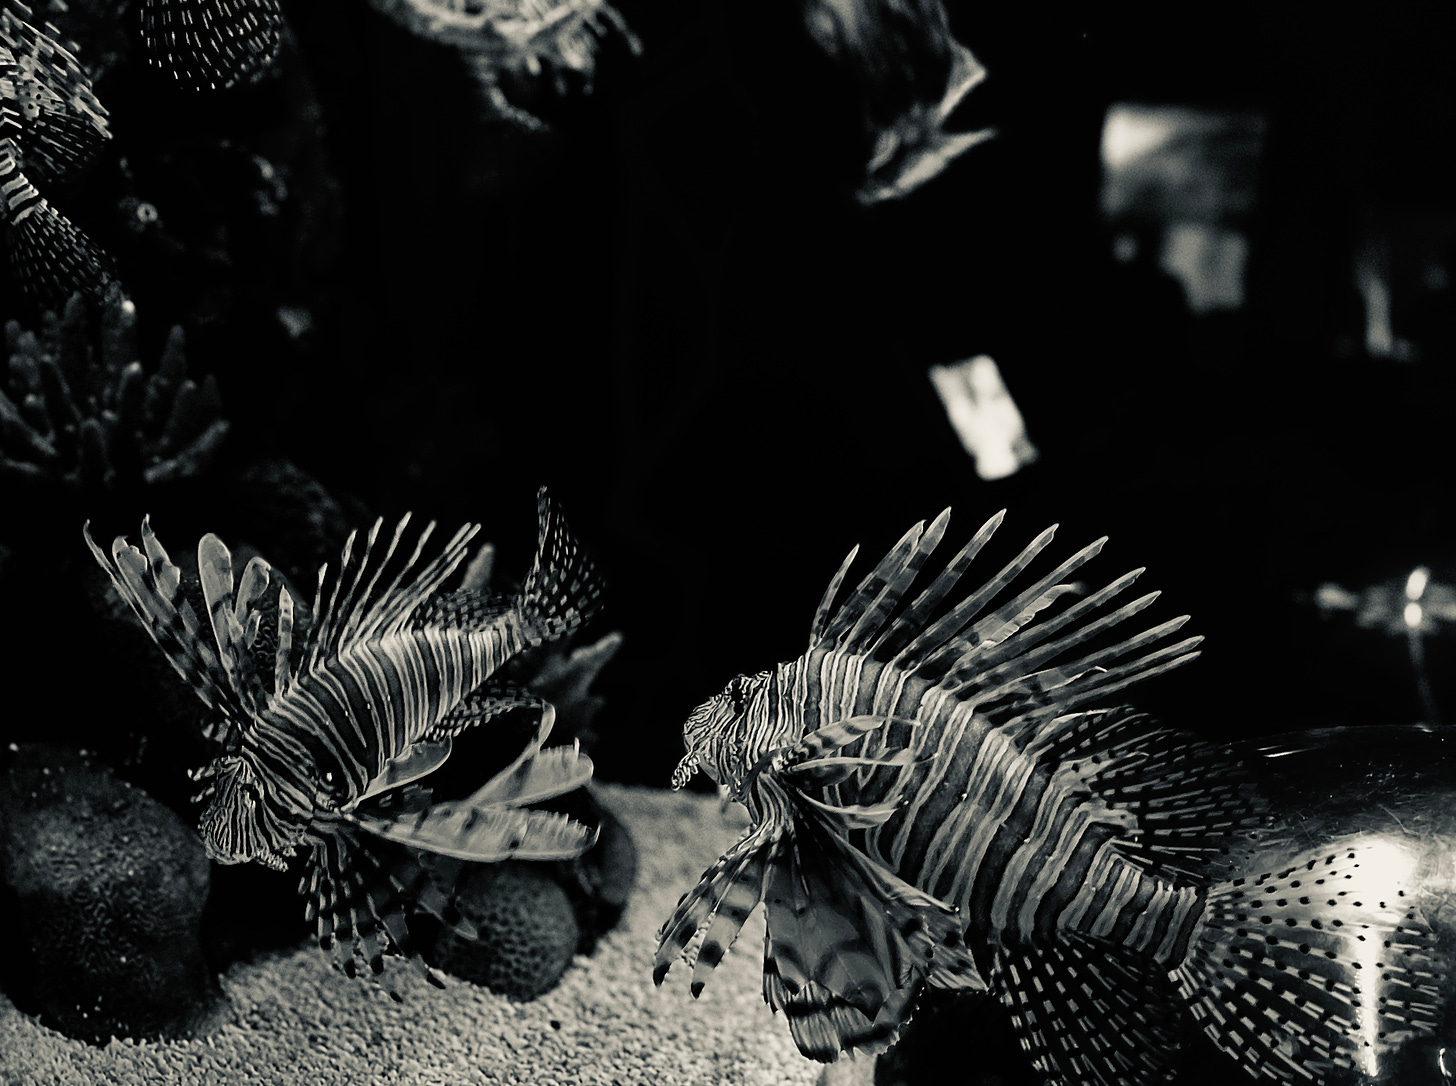 Lion fish in black and white in a tank. 